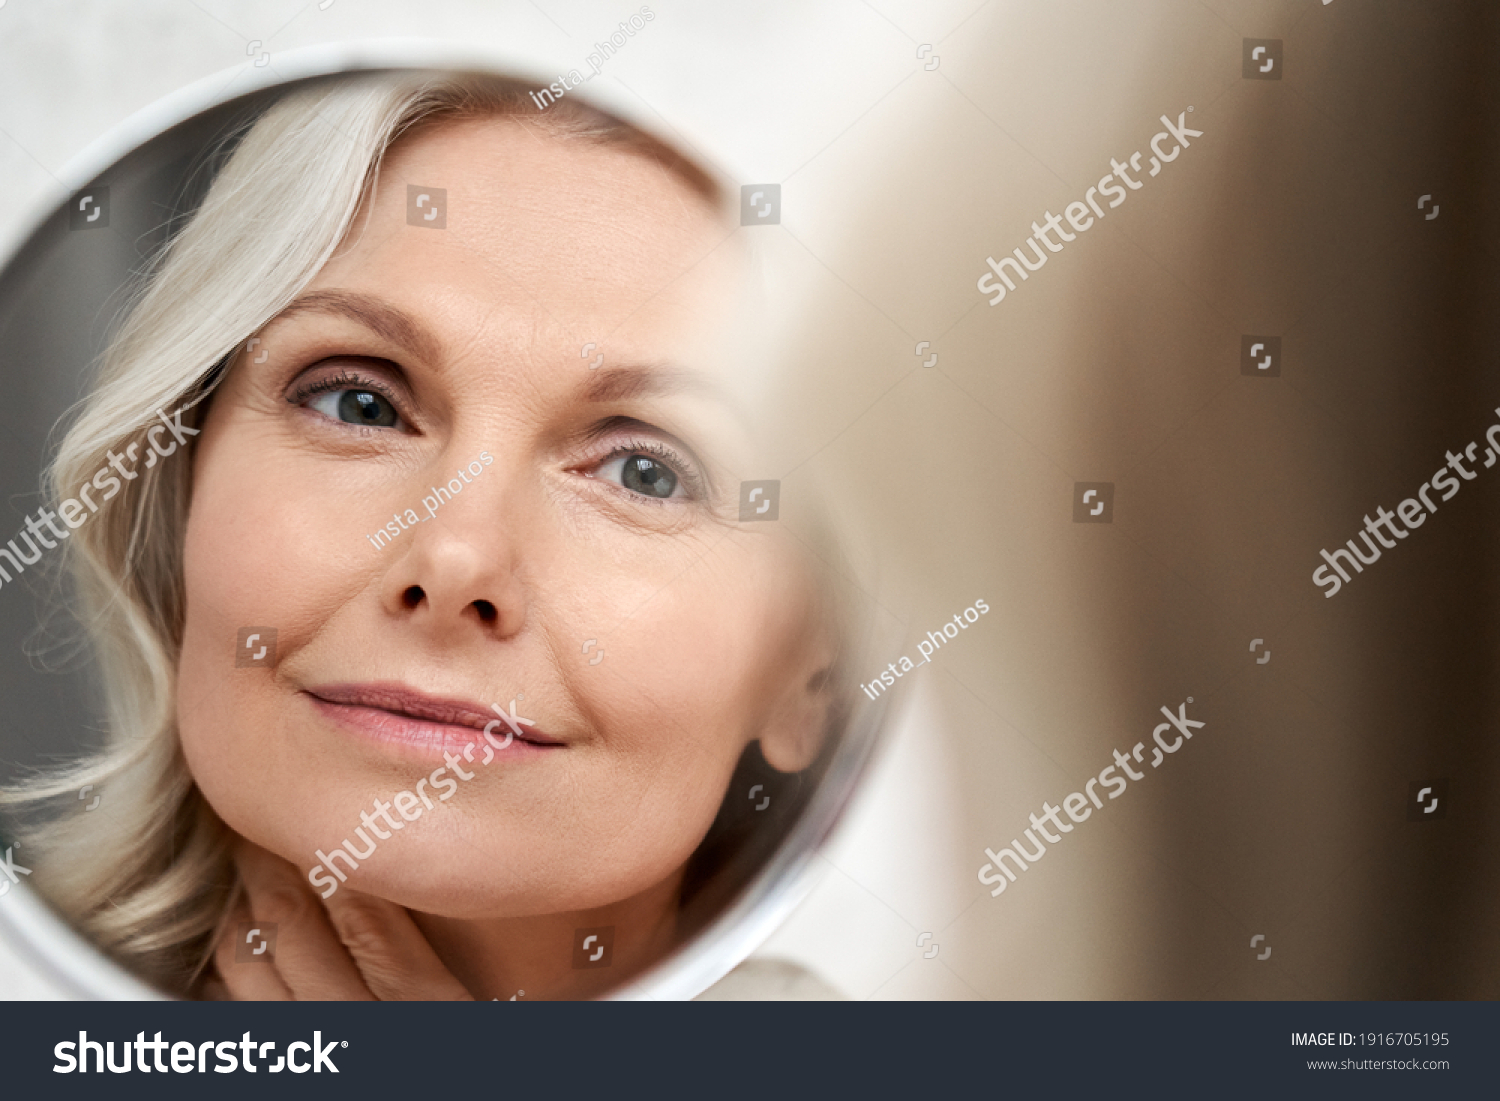 Happy 50s middle aged woman model touching face skin looking in mirror reflection. Smiling mature old lady pampering, healthy moisturized skin care, aging beauty, skincare treatment cosmetics concept. #1916705195